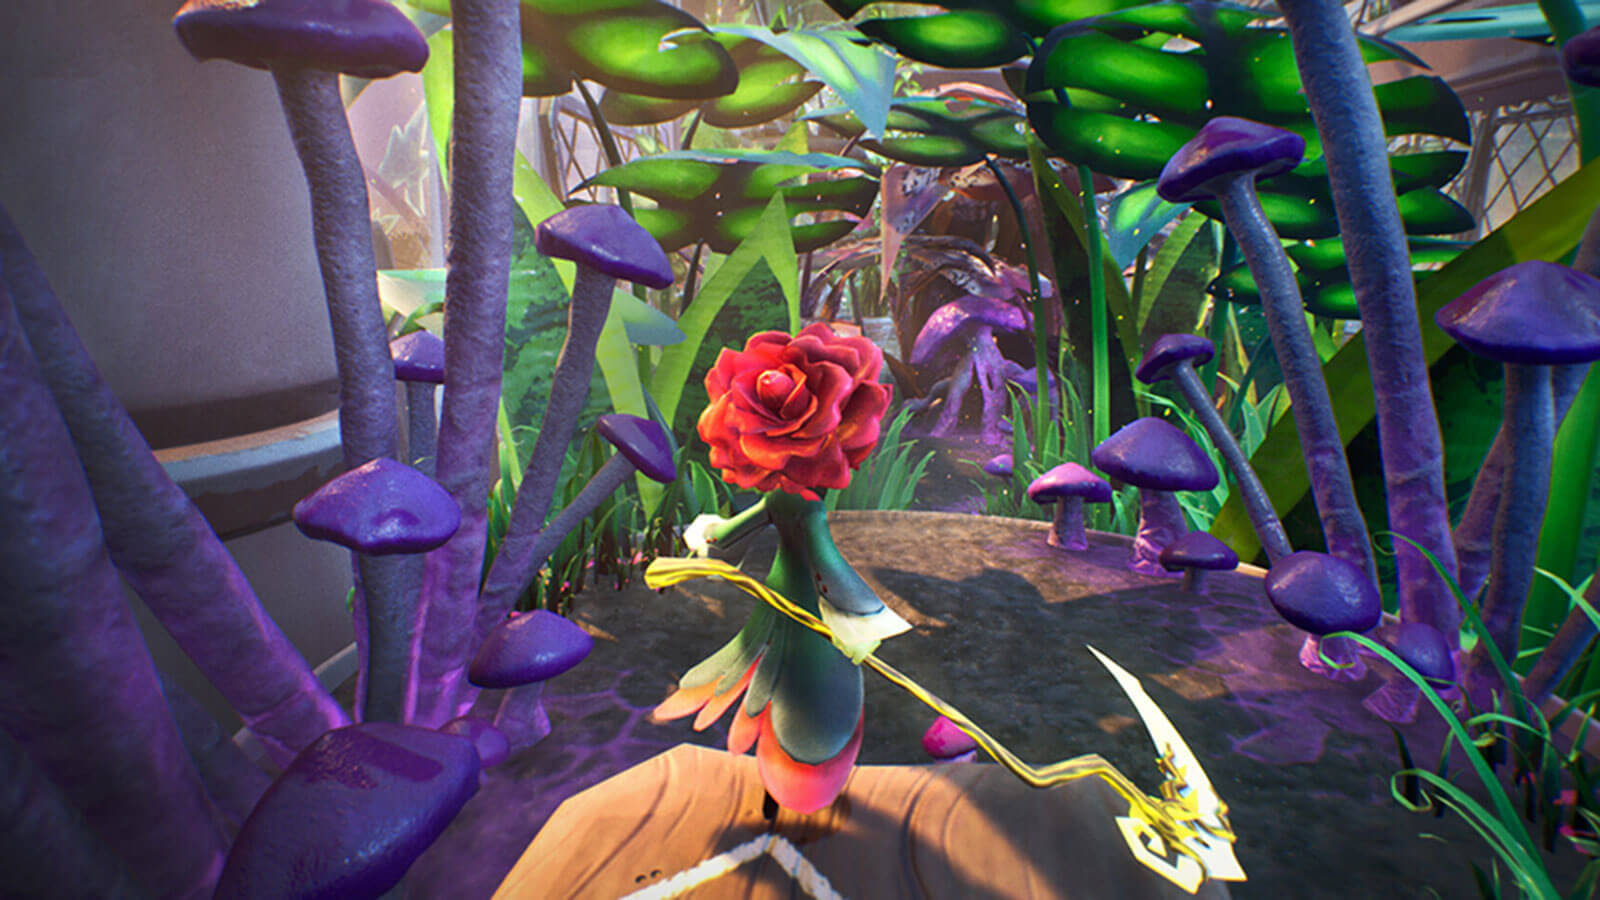 A tiny rose character, Rubin, stands on a platform above a path of towering mushrooms and plants.